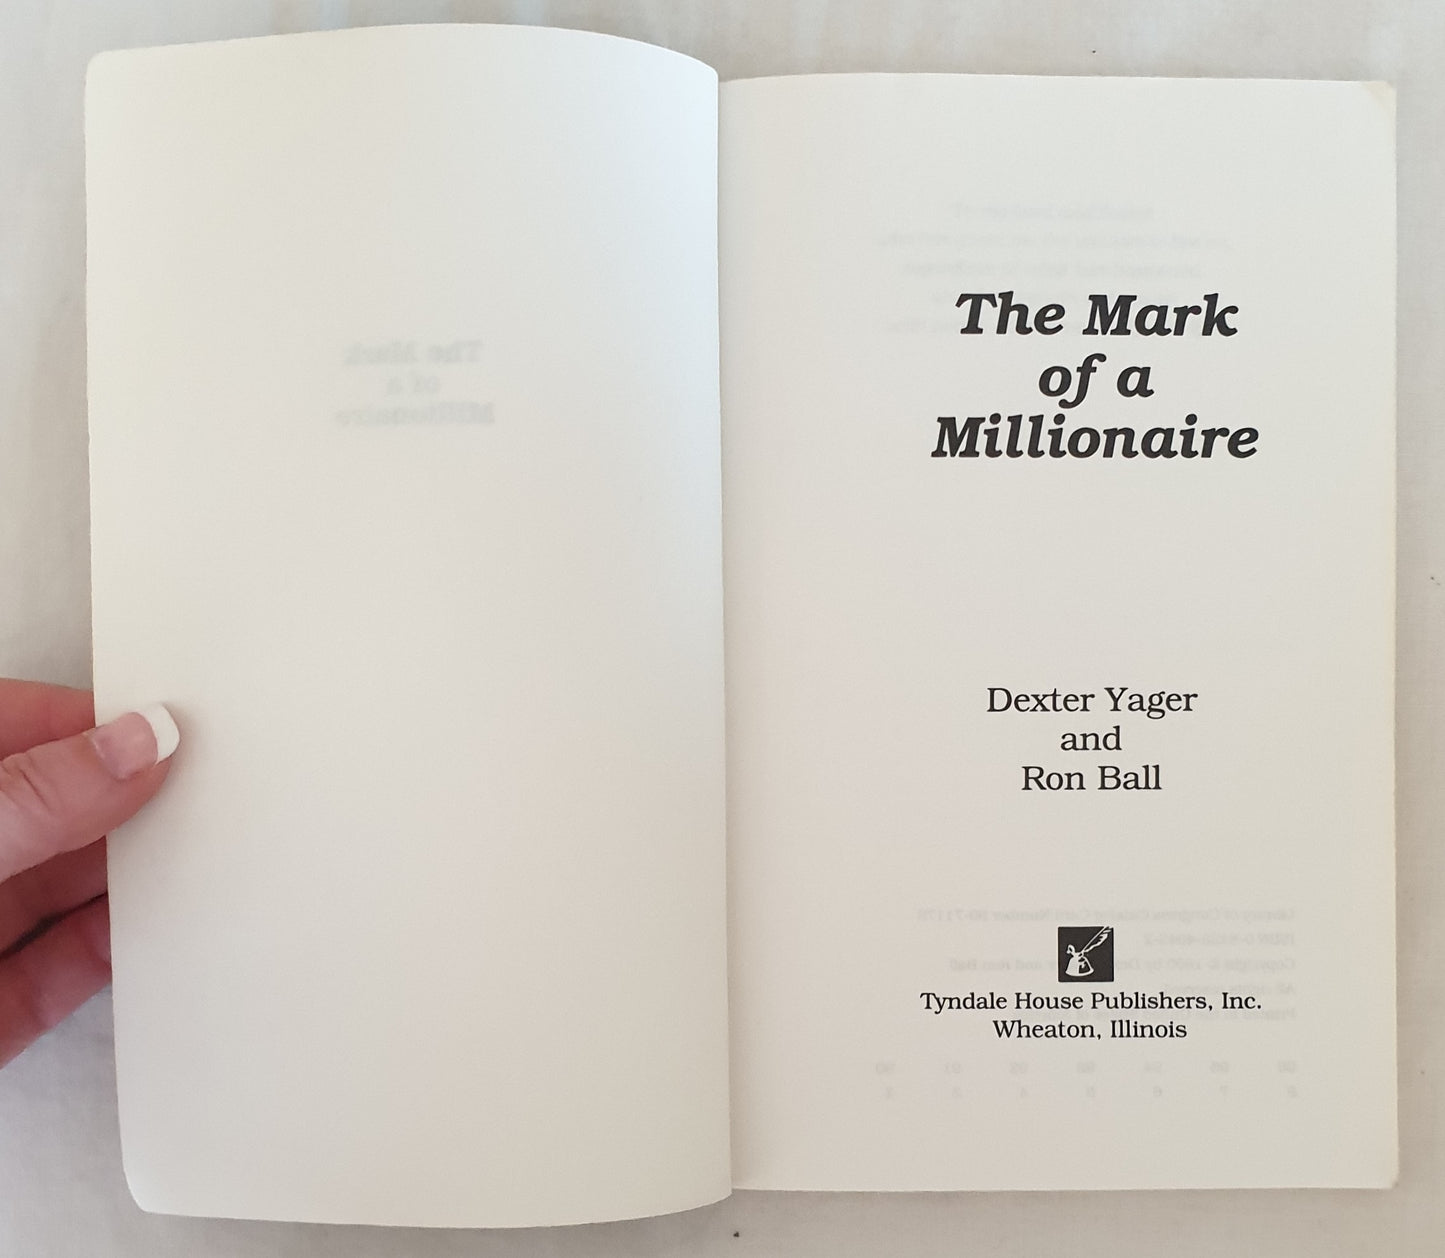 The Mark of a Millionaire by Dexter Yager and Ron Ball